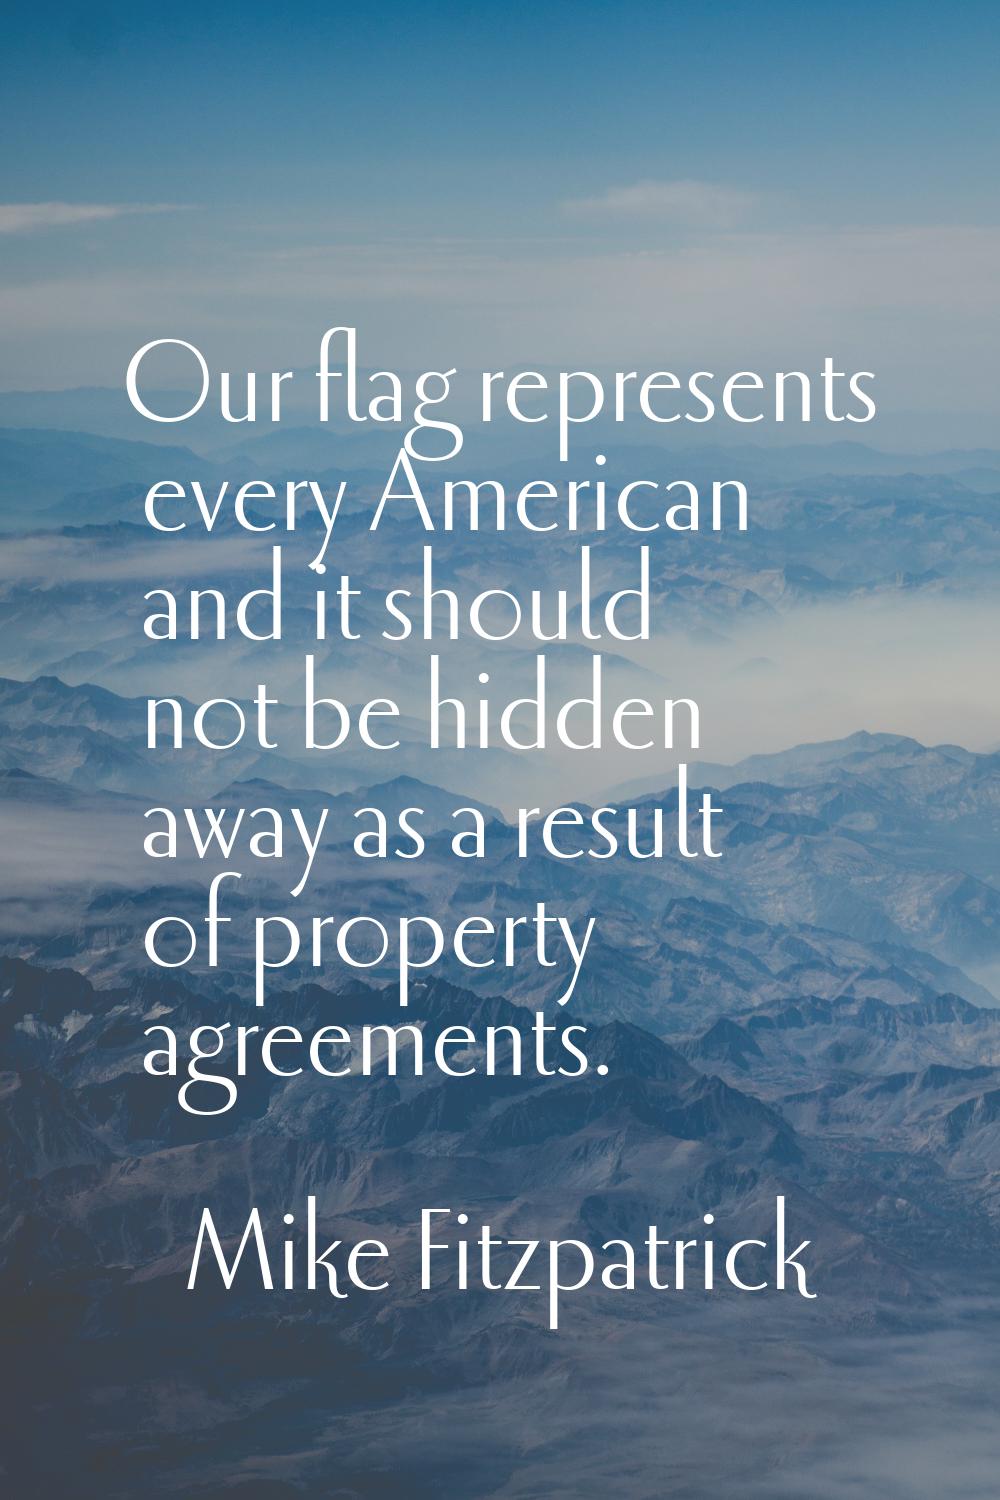 Our flag represents every American and it should not be hidden away as a result of property agreeme